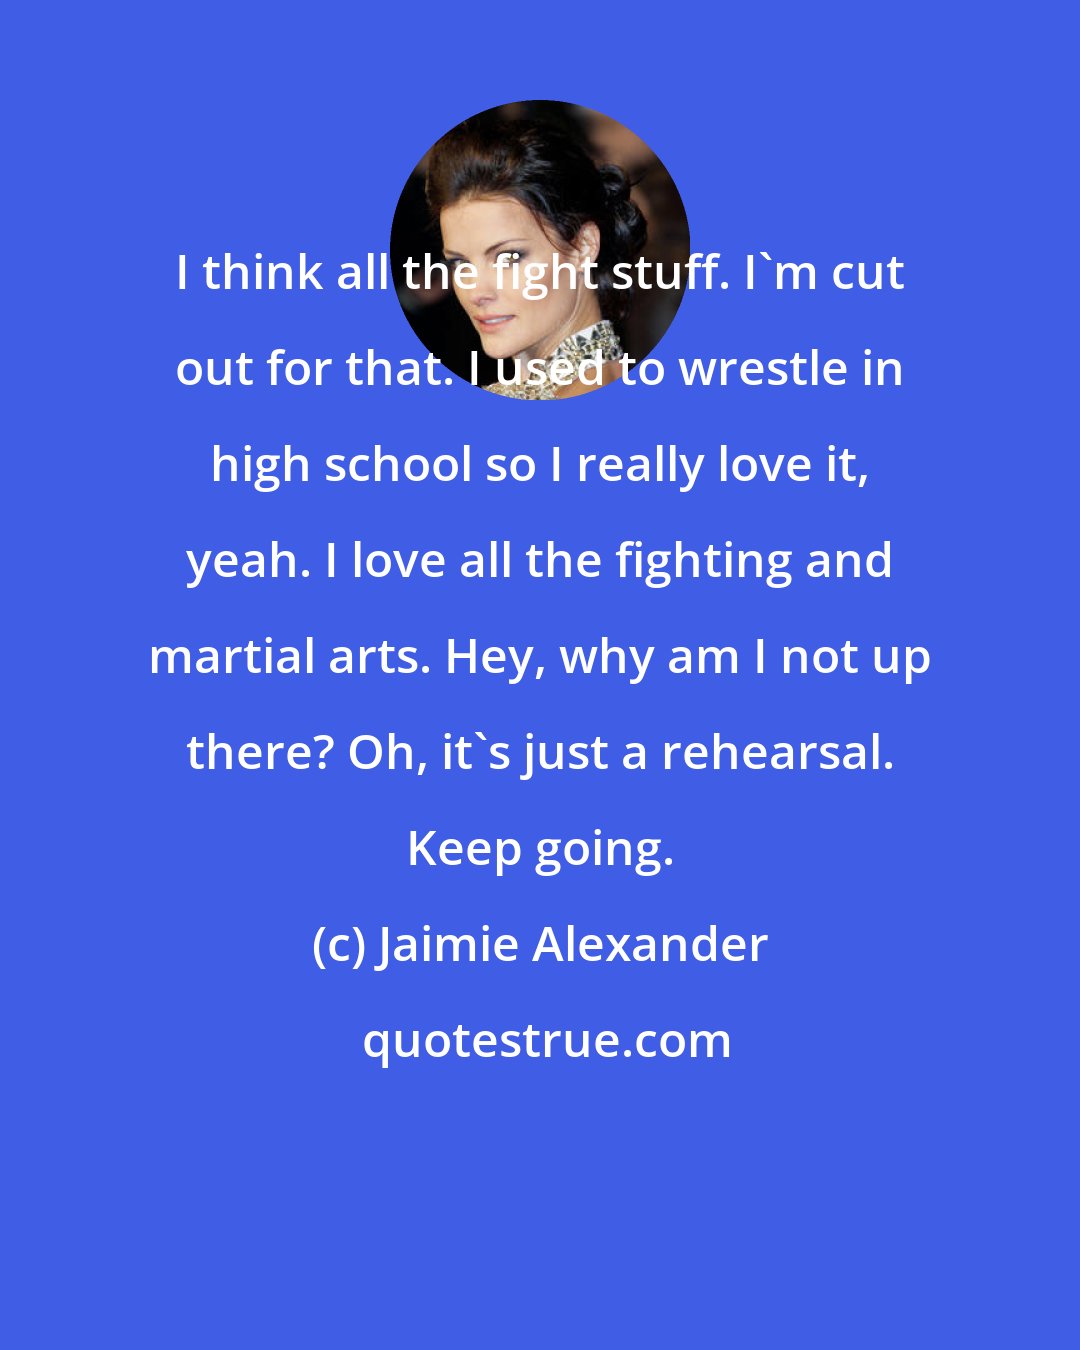 Jaimie Alexander: I think all the fight stuff. I'm cut out for that. I used to wrestle in high school so I really love it, yeah. I love all the fighting and martial arts. Hey, why am I not up there? Oh, it's just a rehearsal. Keep going.